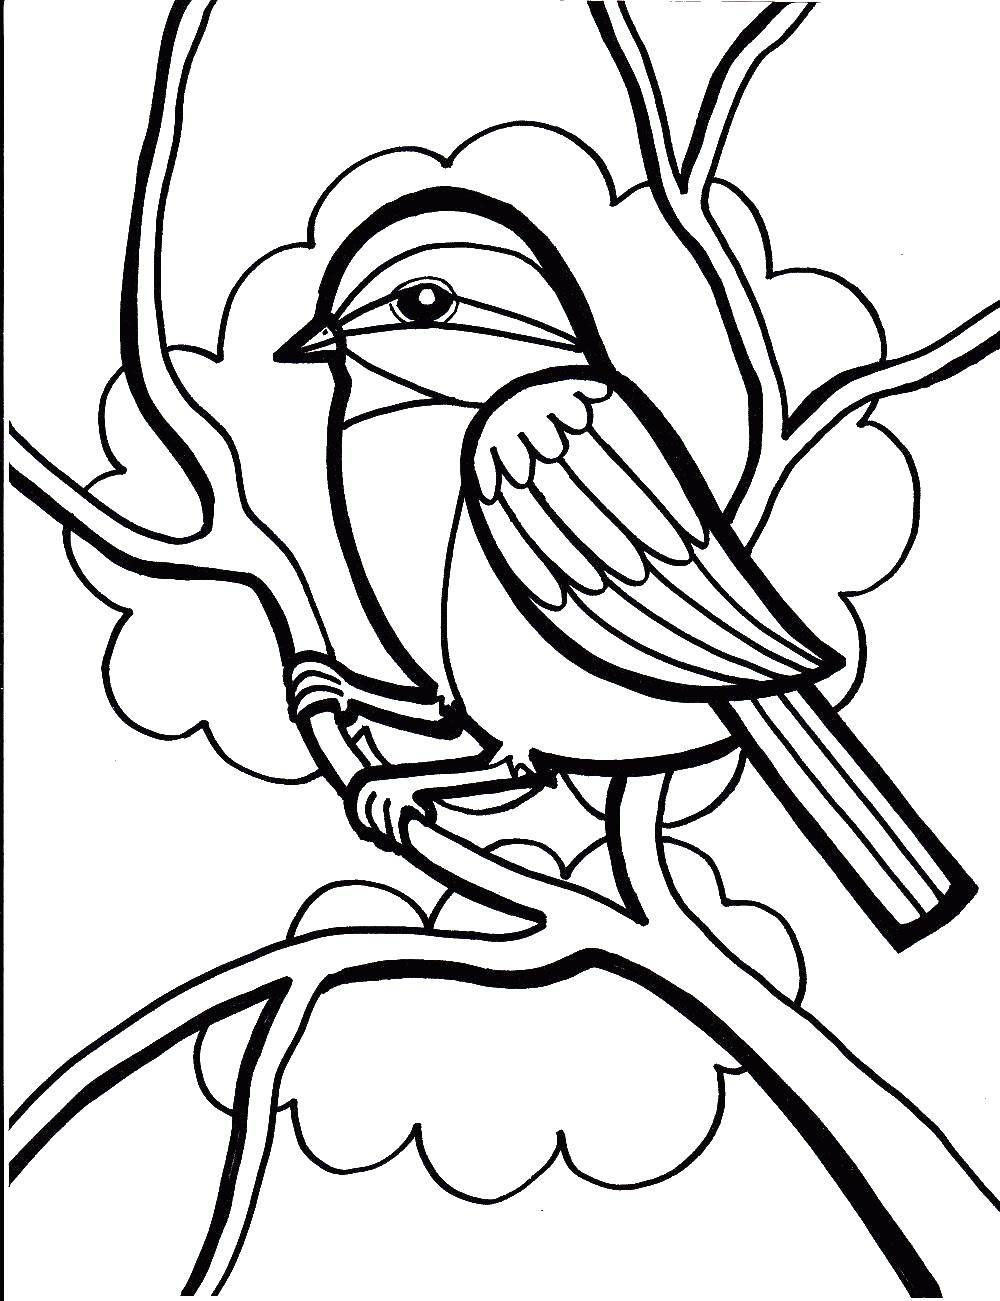 Coloring On the branch sits a bird. Category birds. Tags:  Birds.